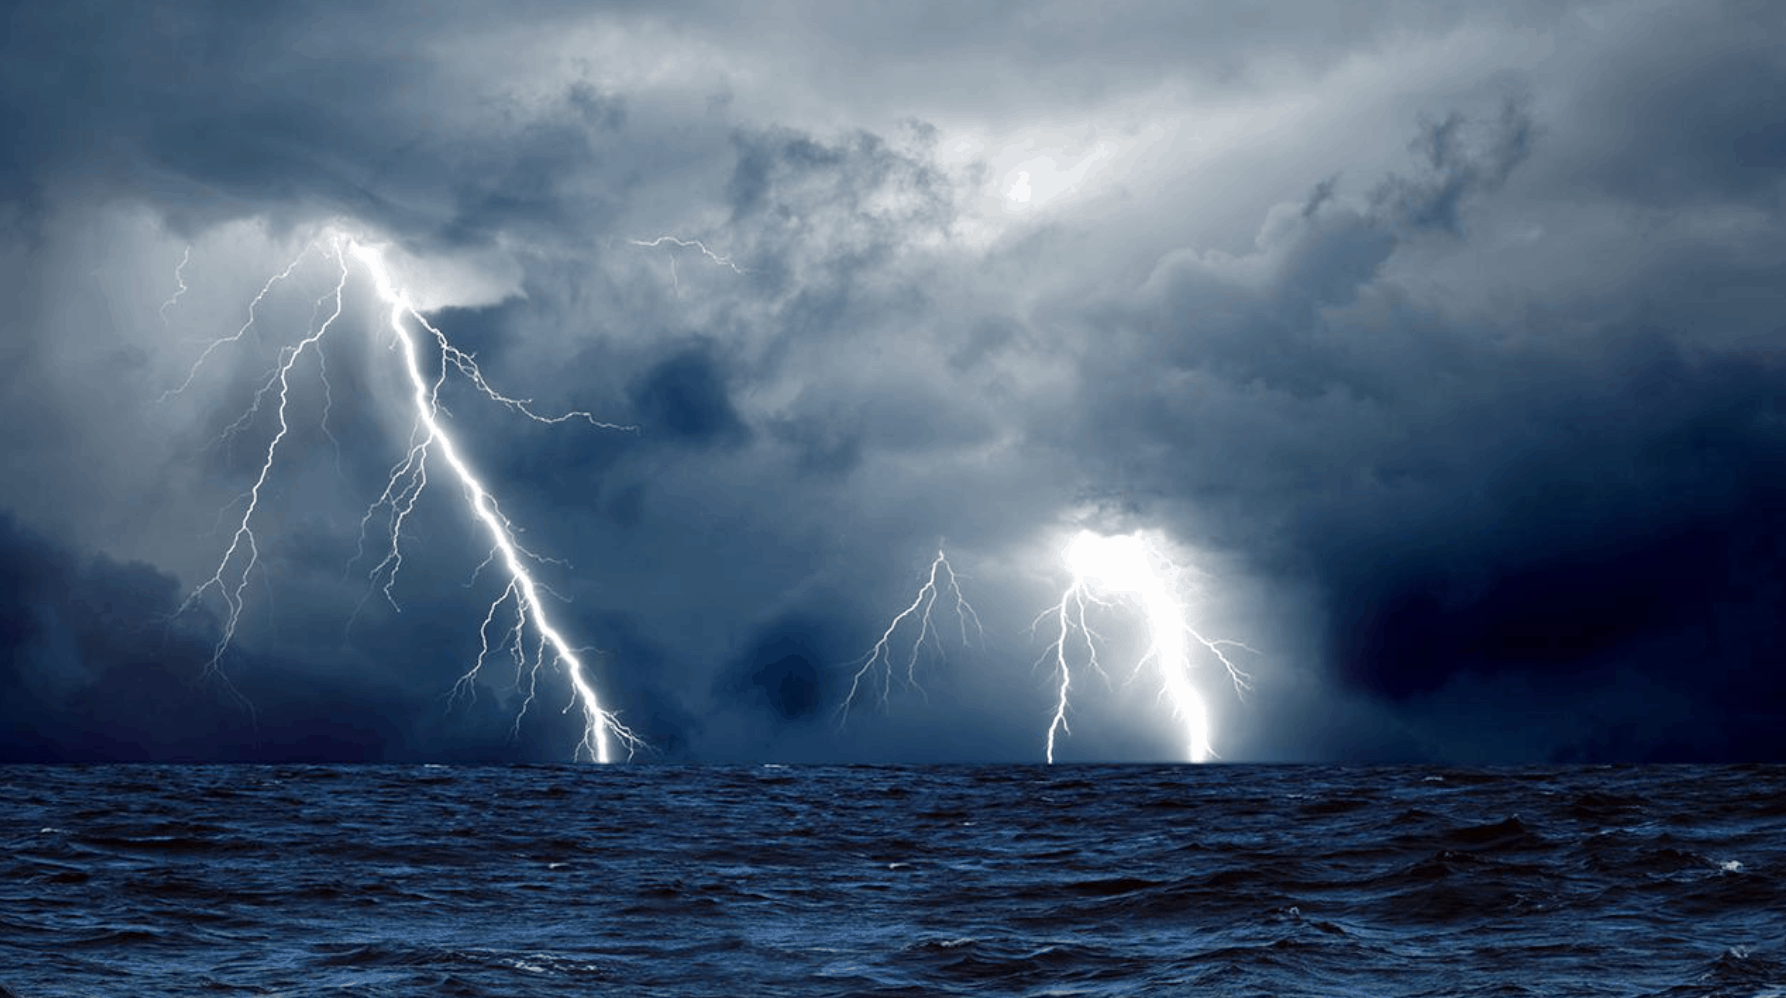 Free download 11 Amazing Android Live Wallpaper for Summer [1786x998] for your Desktop, Mobile & Tablet. Explore Summer Storm Wallpaper. Spring Thunderstorm Wallpaper, Rain Storm Wallpaper, Free Storm Wallpaper